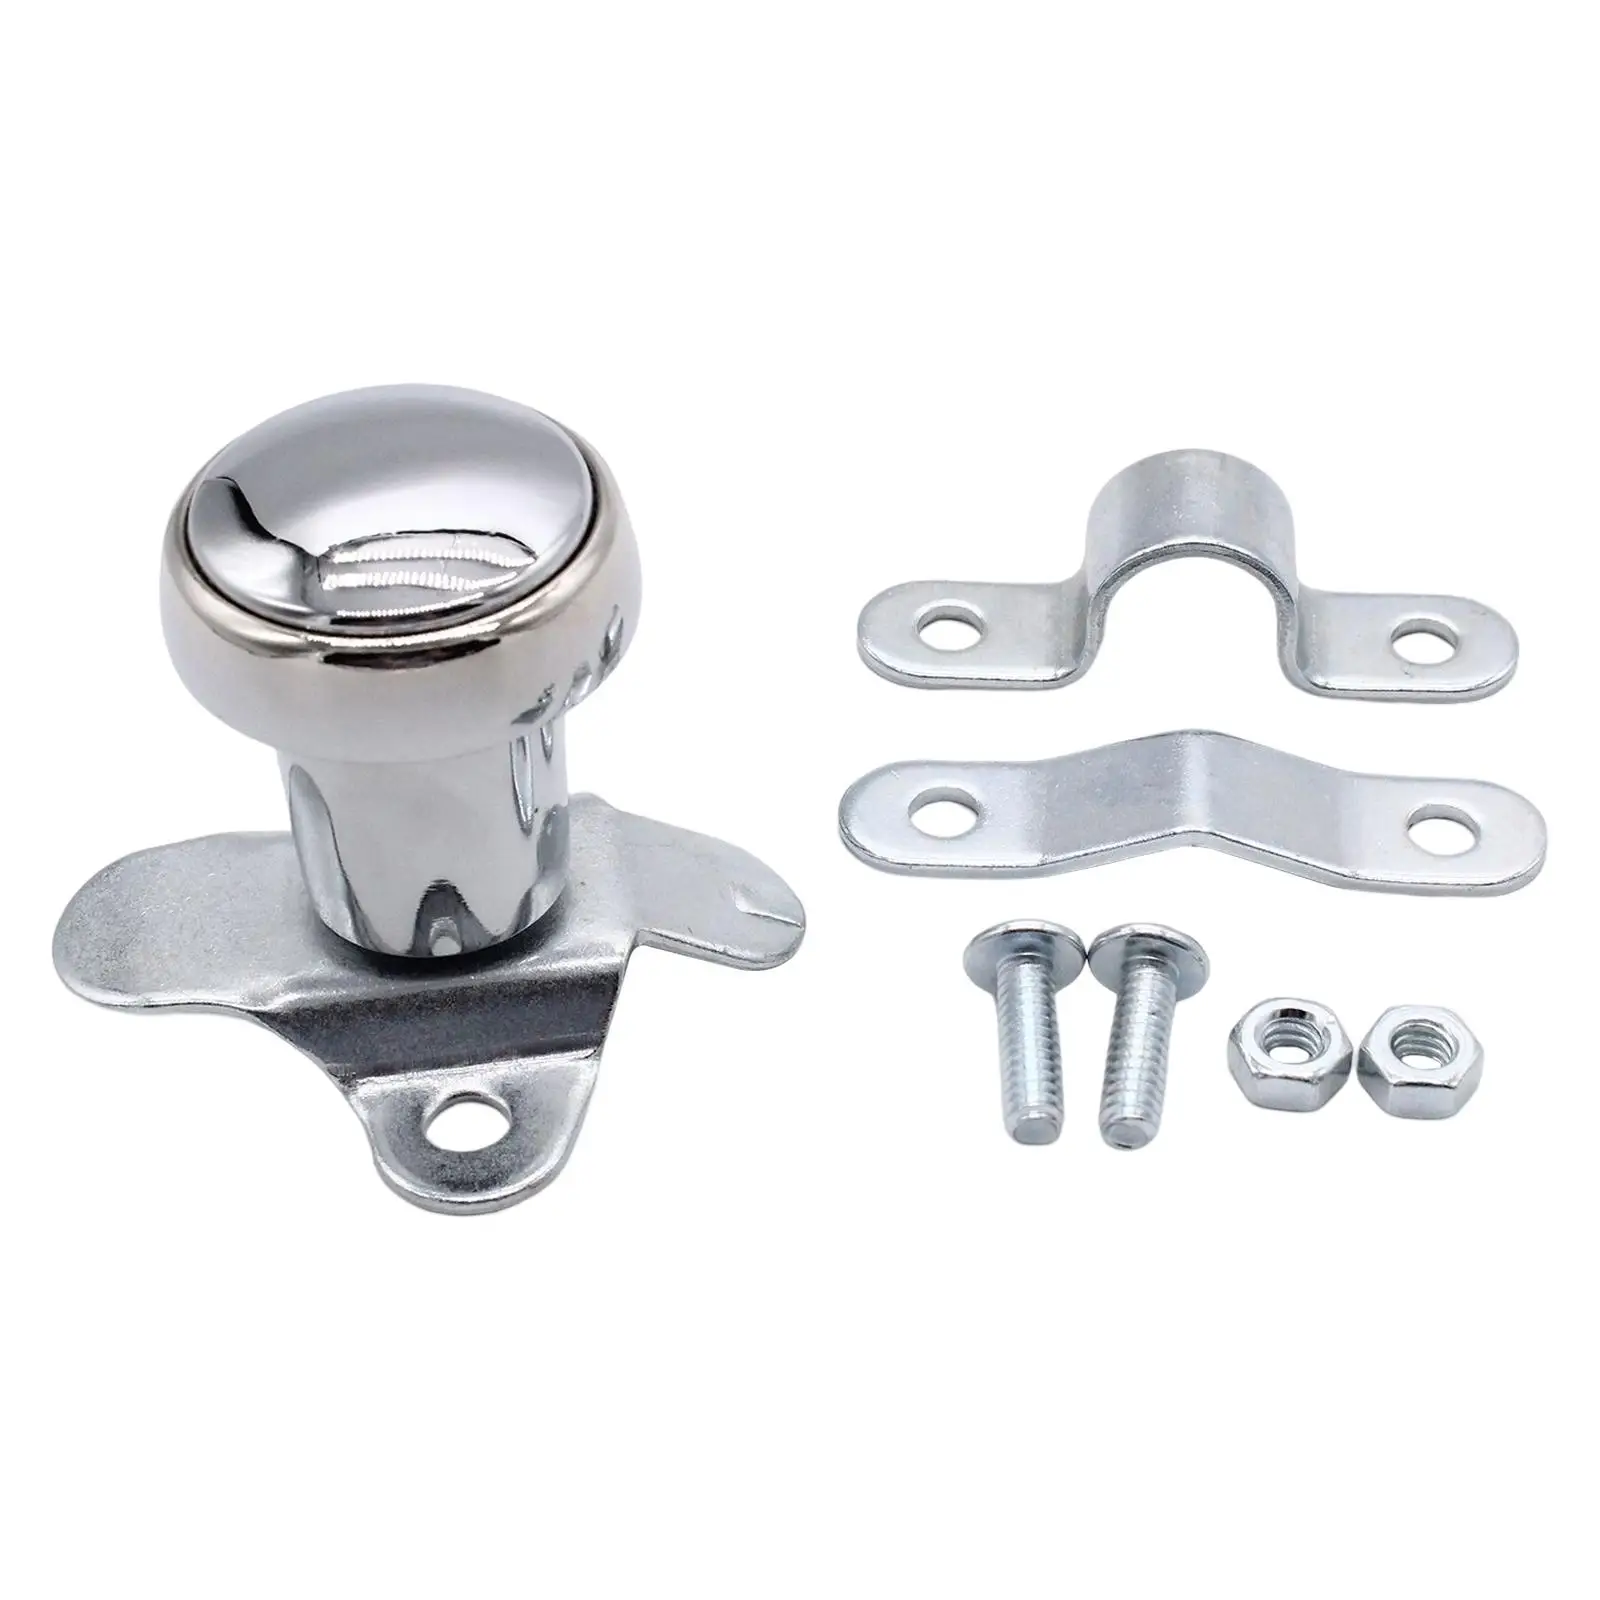 Chrome Steering Wheel / Suicide Knob 70108 Polished Heavy Duty/ for  Vehicles Lawn Mowers Replacement